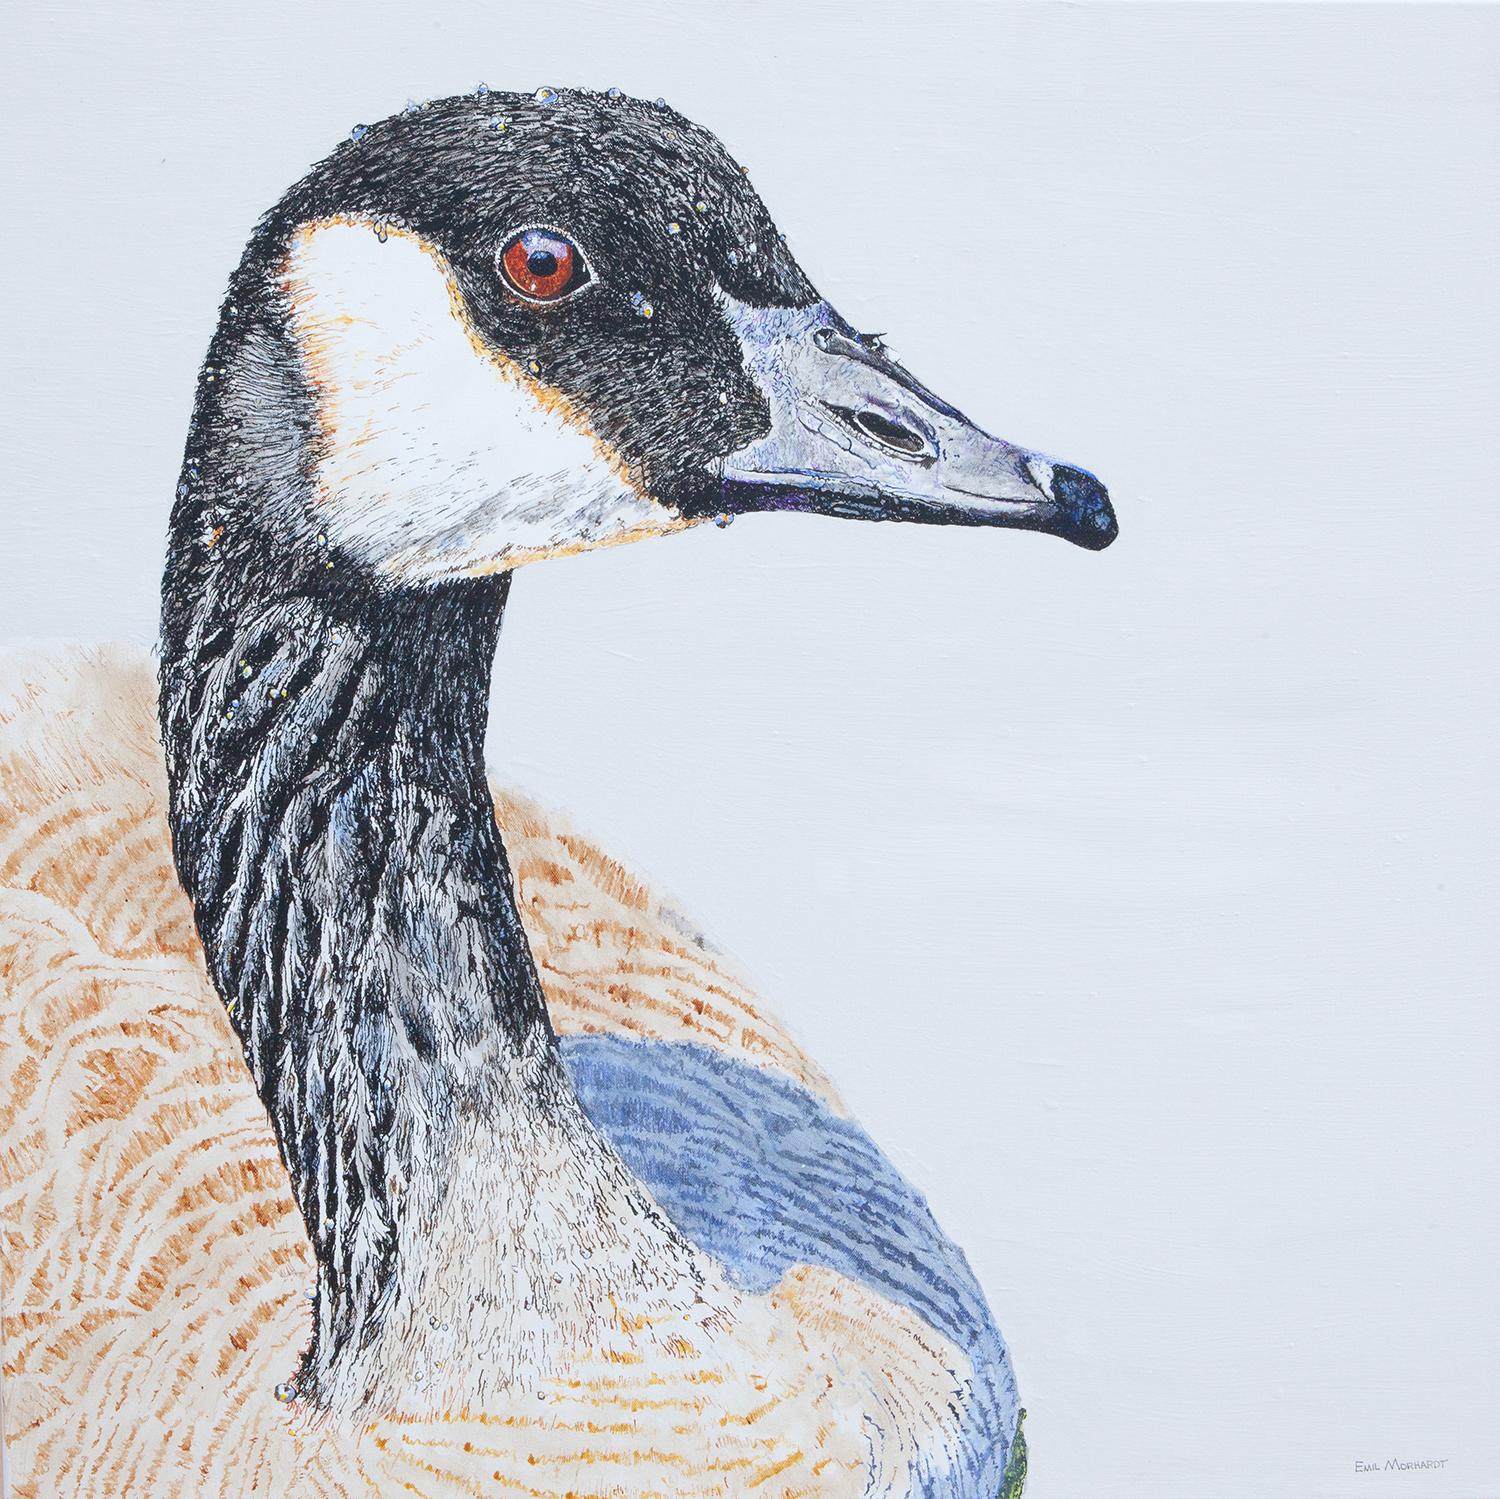 Emil Morhardt - Canada Goose #1, Original Painting For Sale at 1stDibs